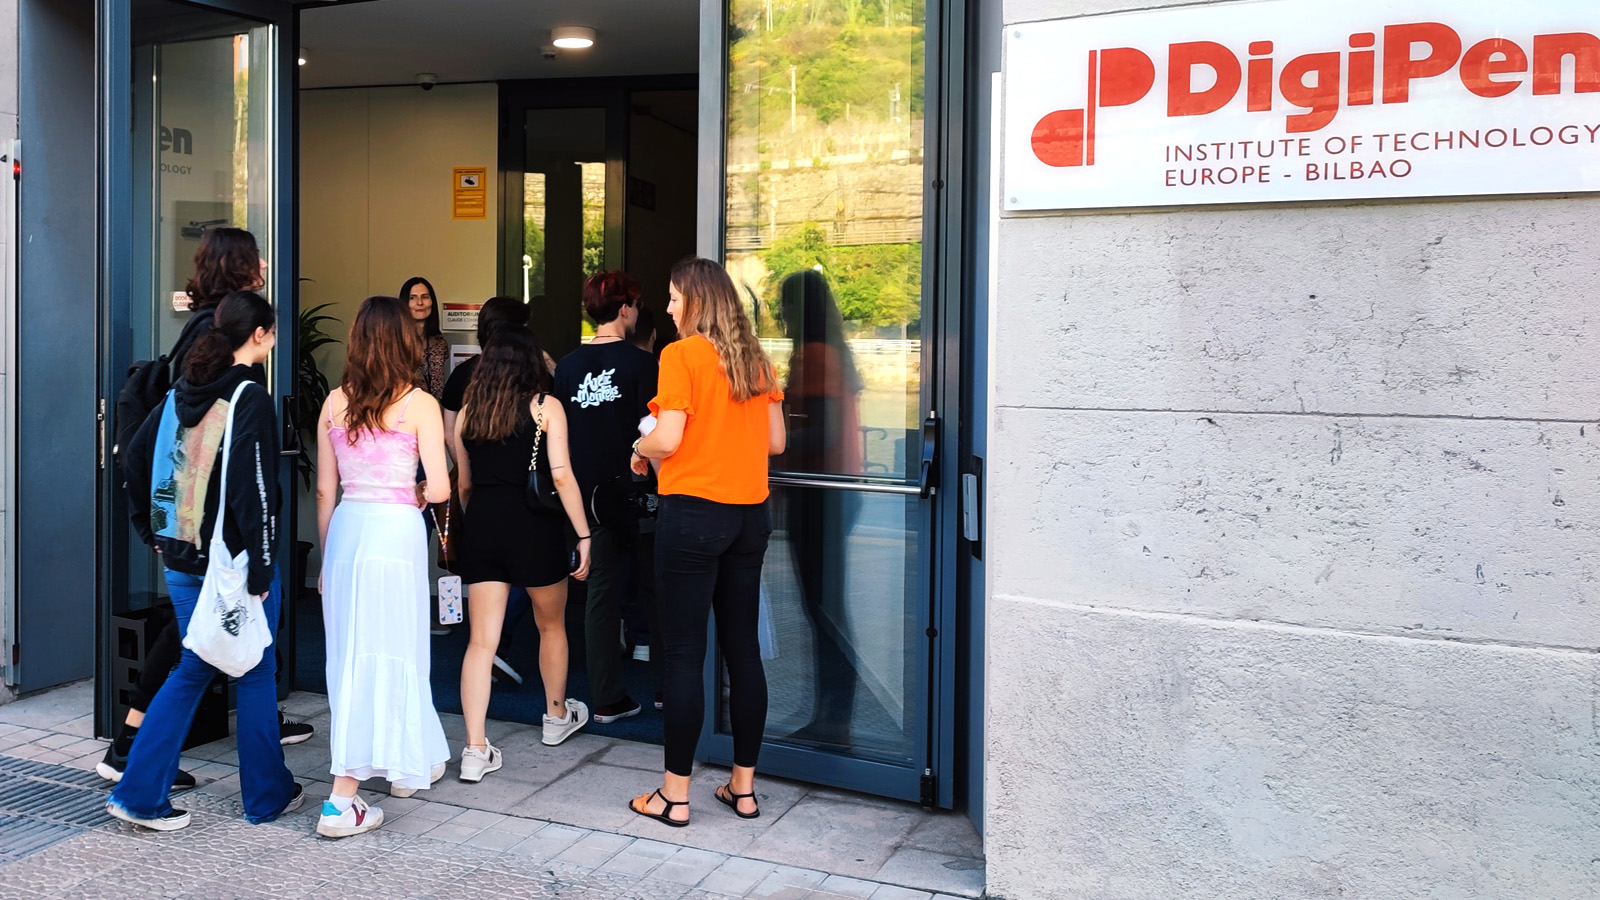 The freshman year students at the entrance of Digipen Europe-Bilbao accompanied by administrative staff.